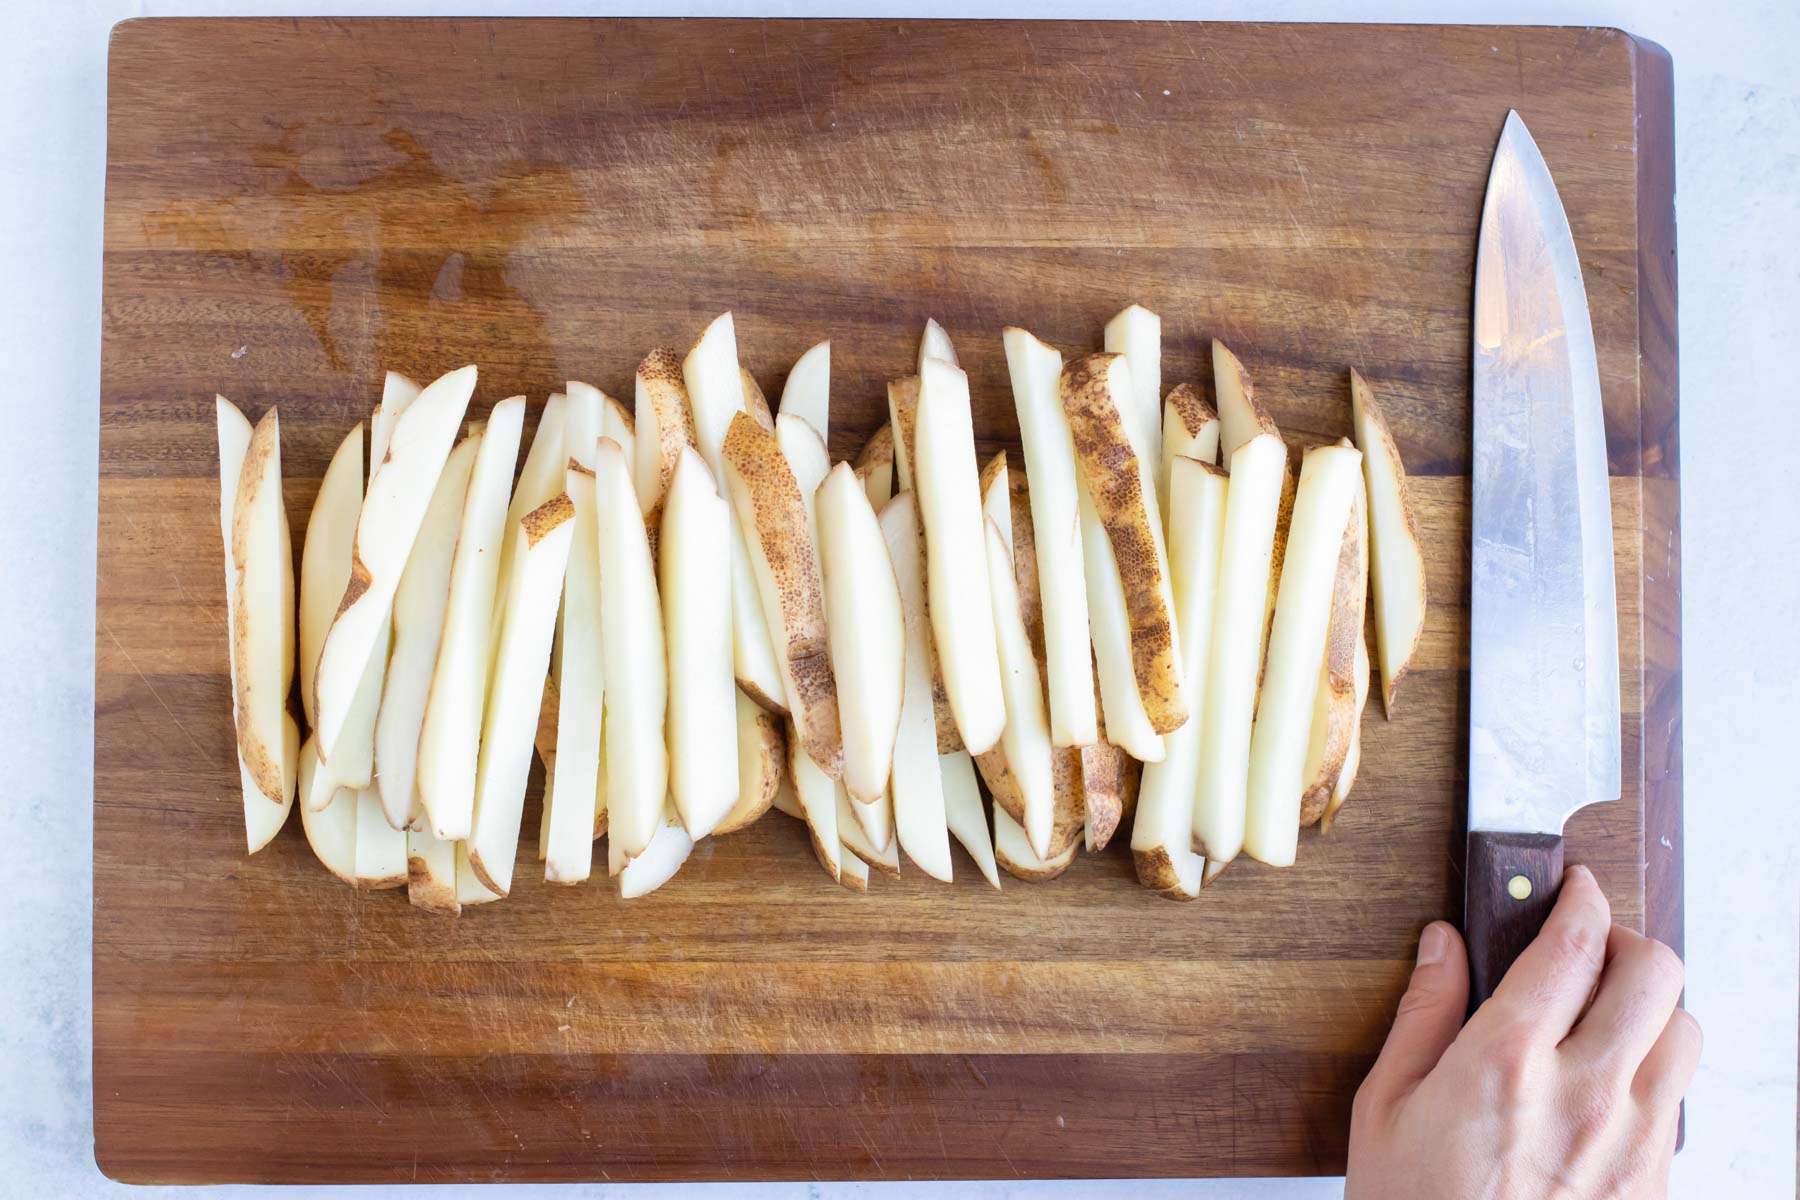 Homemade french fries are prepared on a wooden cutting board.